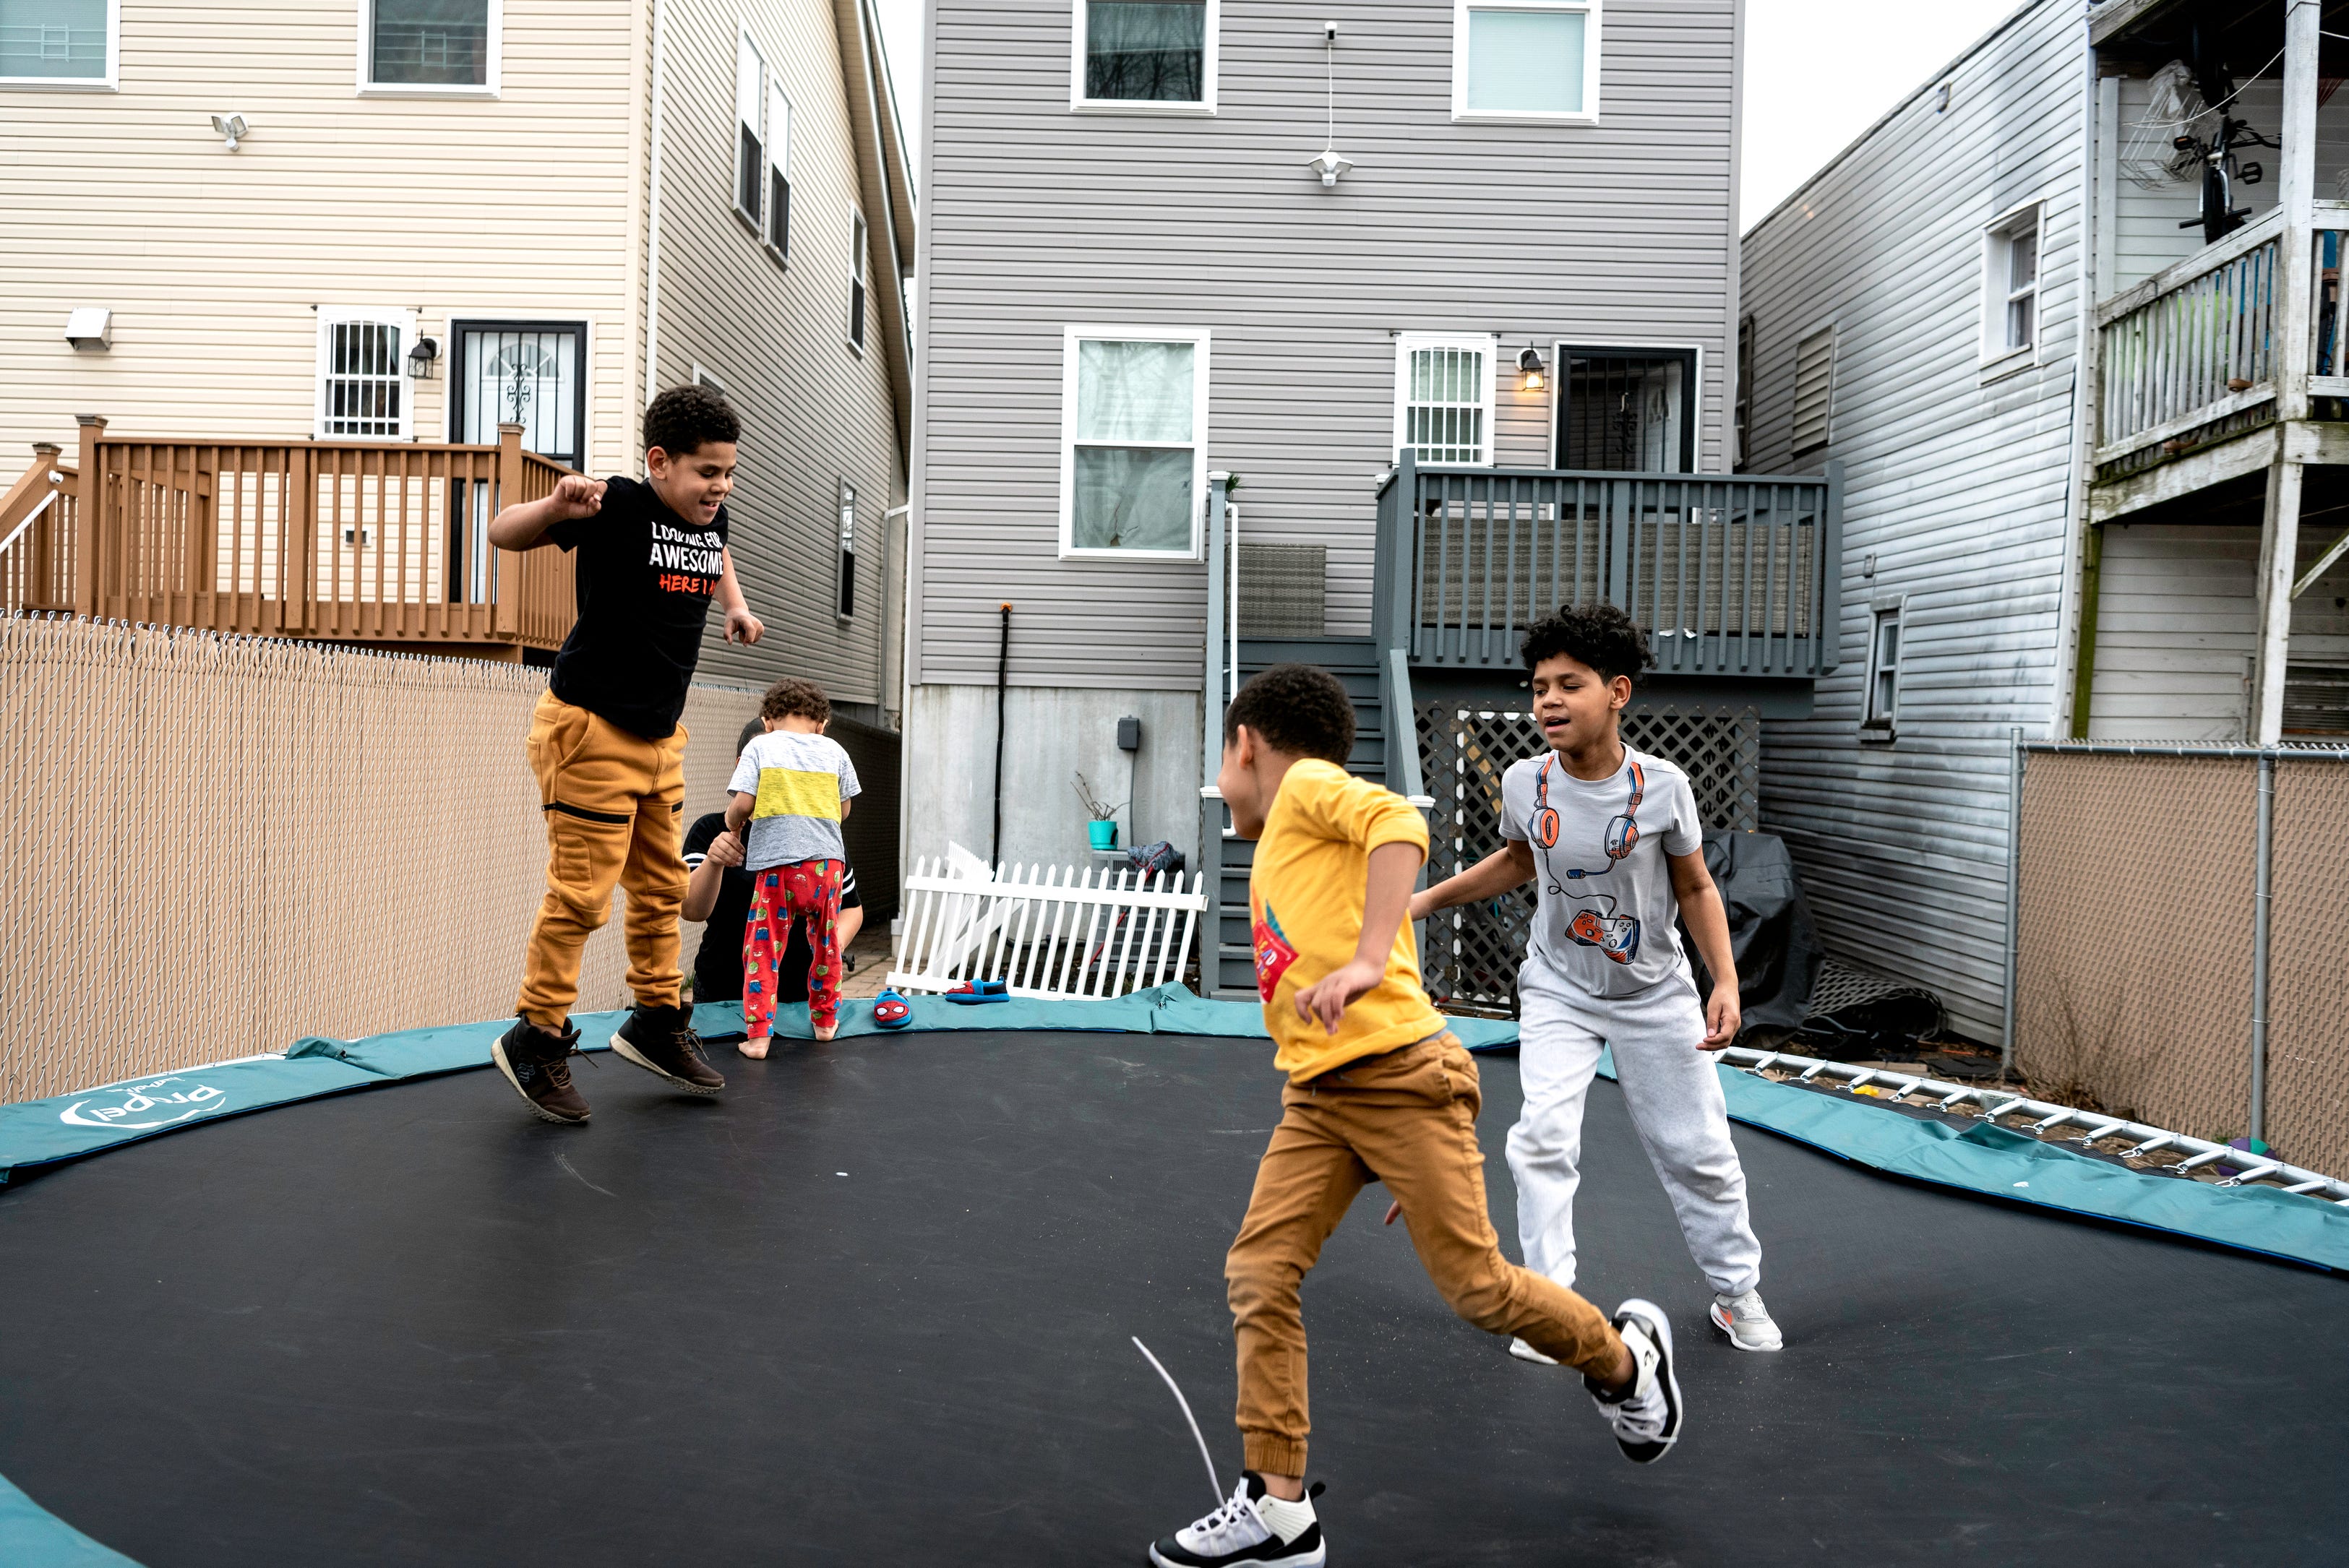 The De La Cruz brothers, Israel, 8, Benjamin, 5, and Raylin, 10, blow off steam after a day of remote learning in the backyard of their Hamilton Ave. home in Paterson. Dafani Peralta and Ramon De La Cruz and their six children, moved into their new home on 185 Hamilton Ave. in Paterson last year. The home is part of the "Hamilton 7," a group of seven Habitat for Humanity homes built on the block.